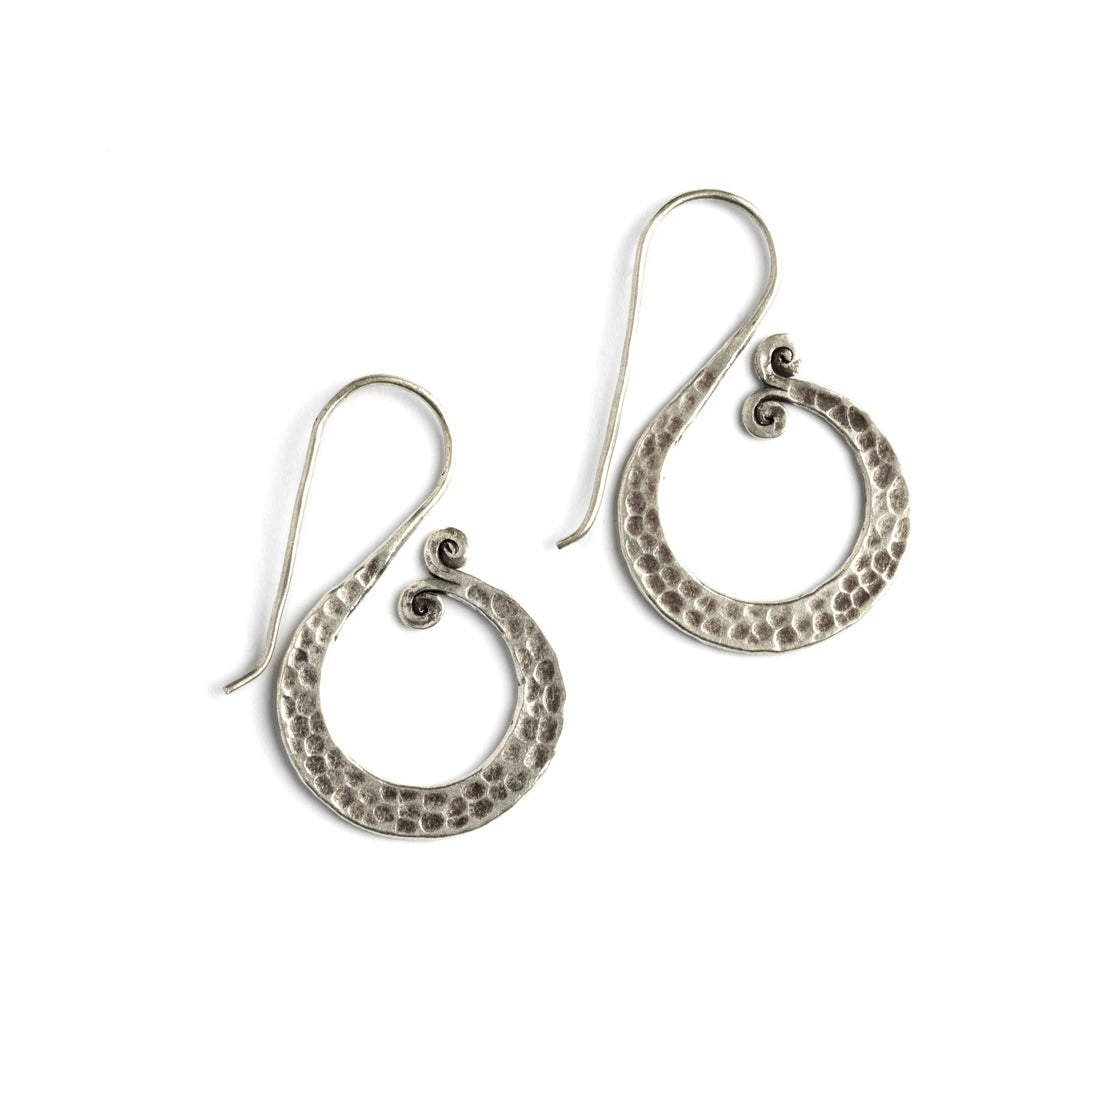 Hammered Tribal Silver Earrings frontal view